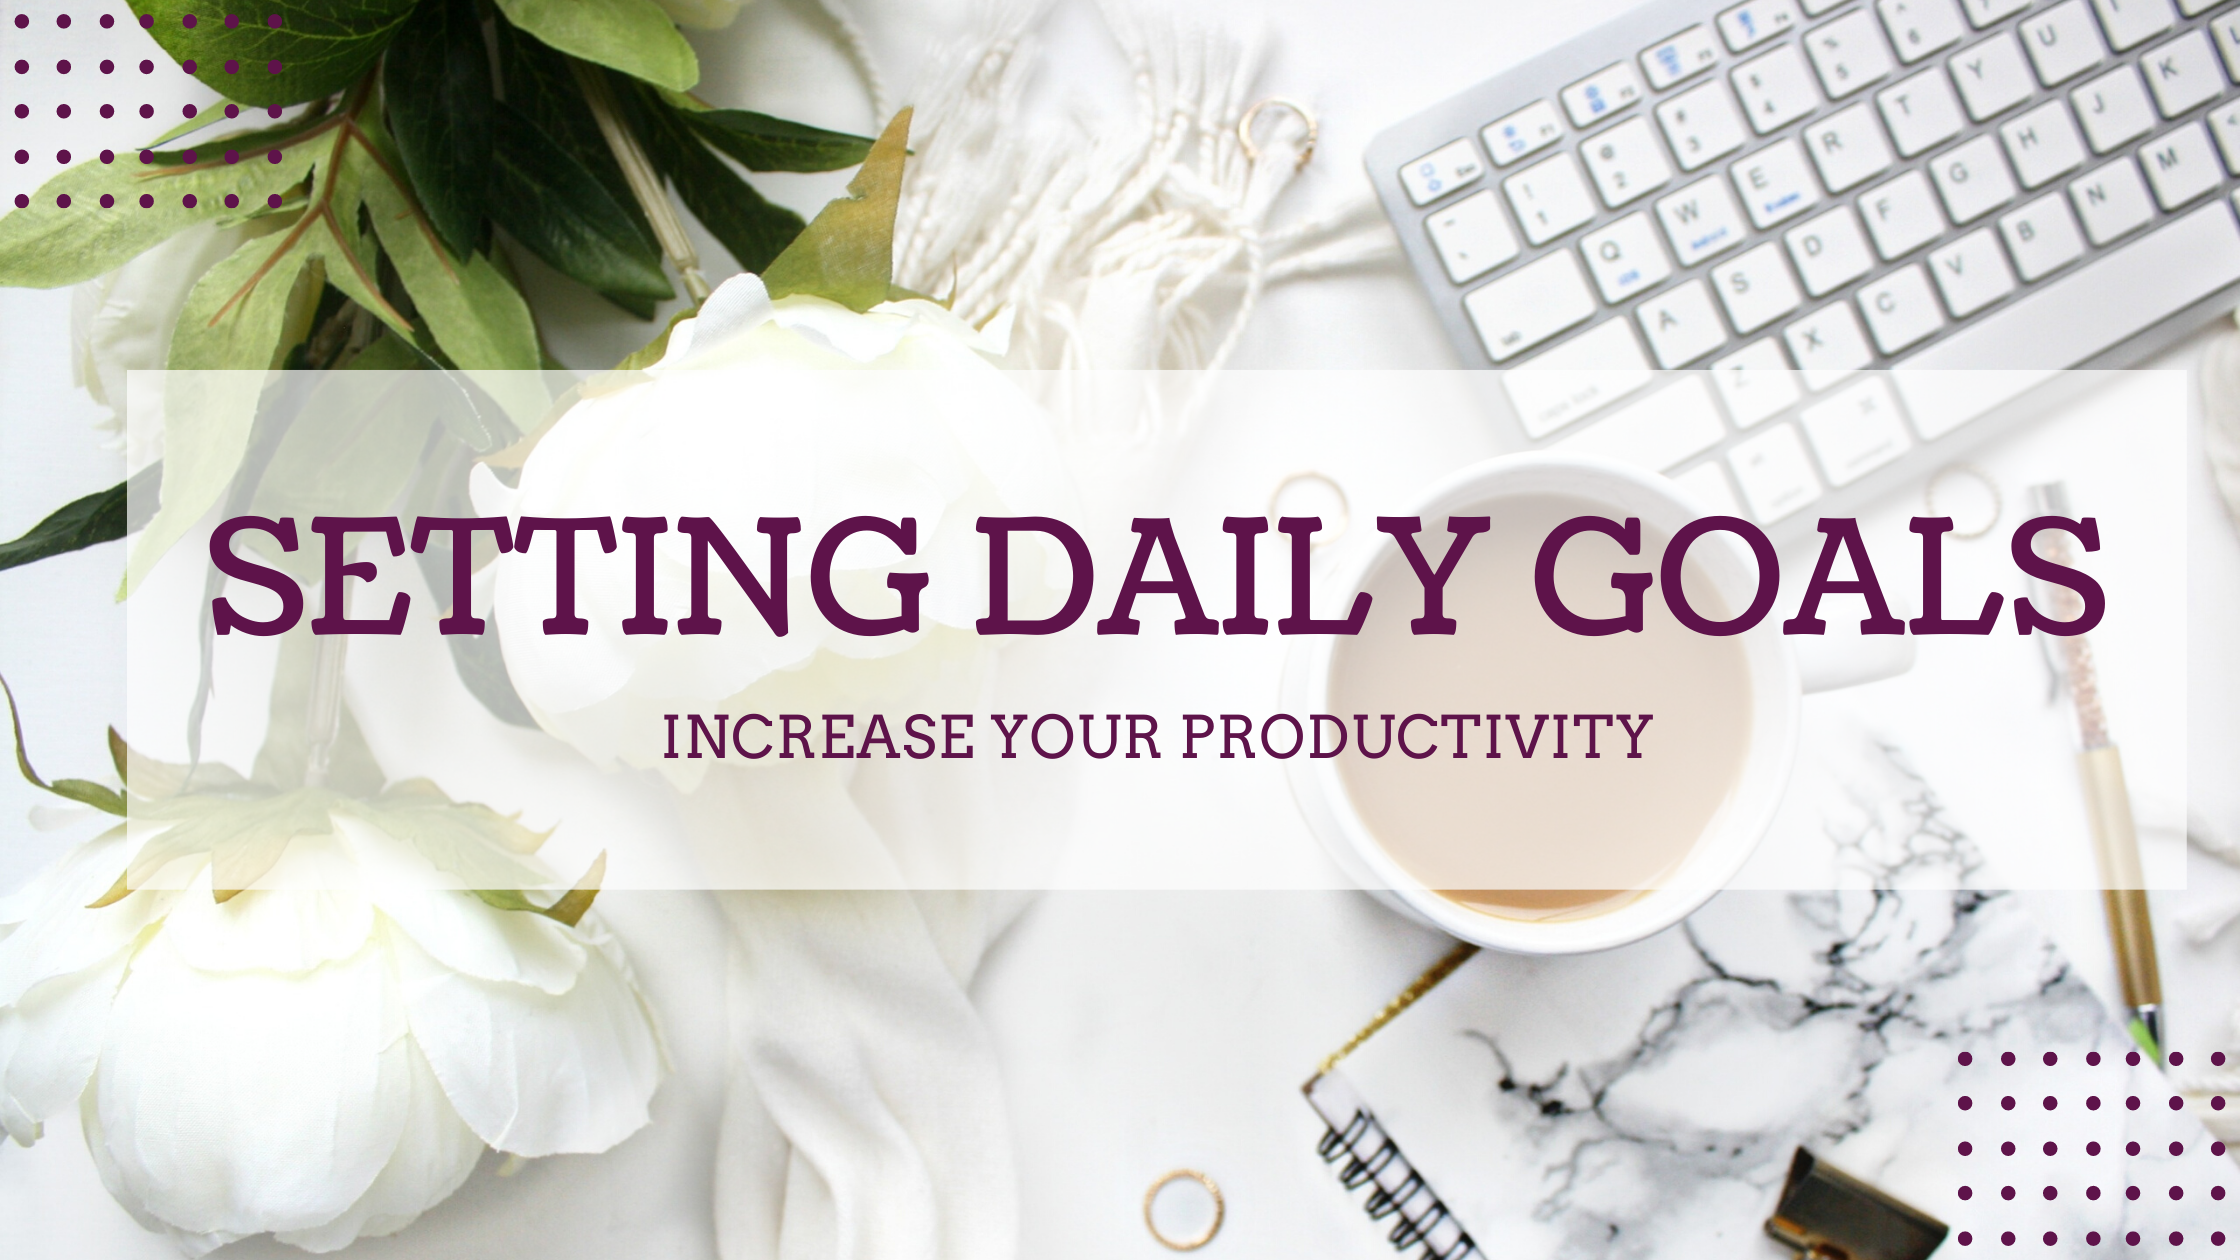 Increase Your Productivity By Setting Daily Goals